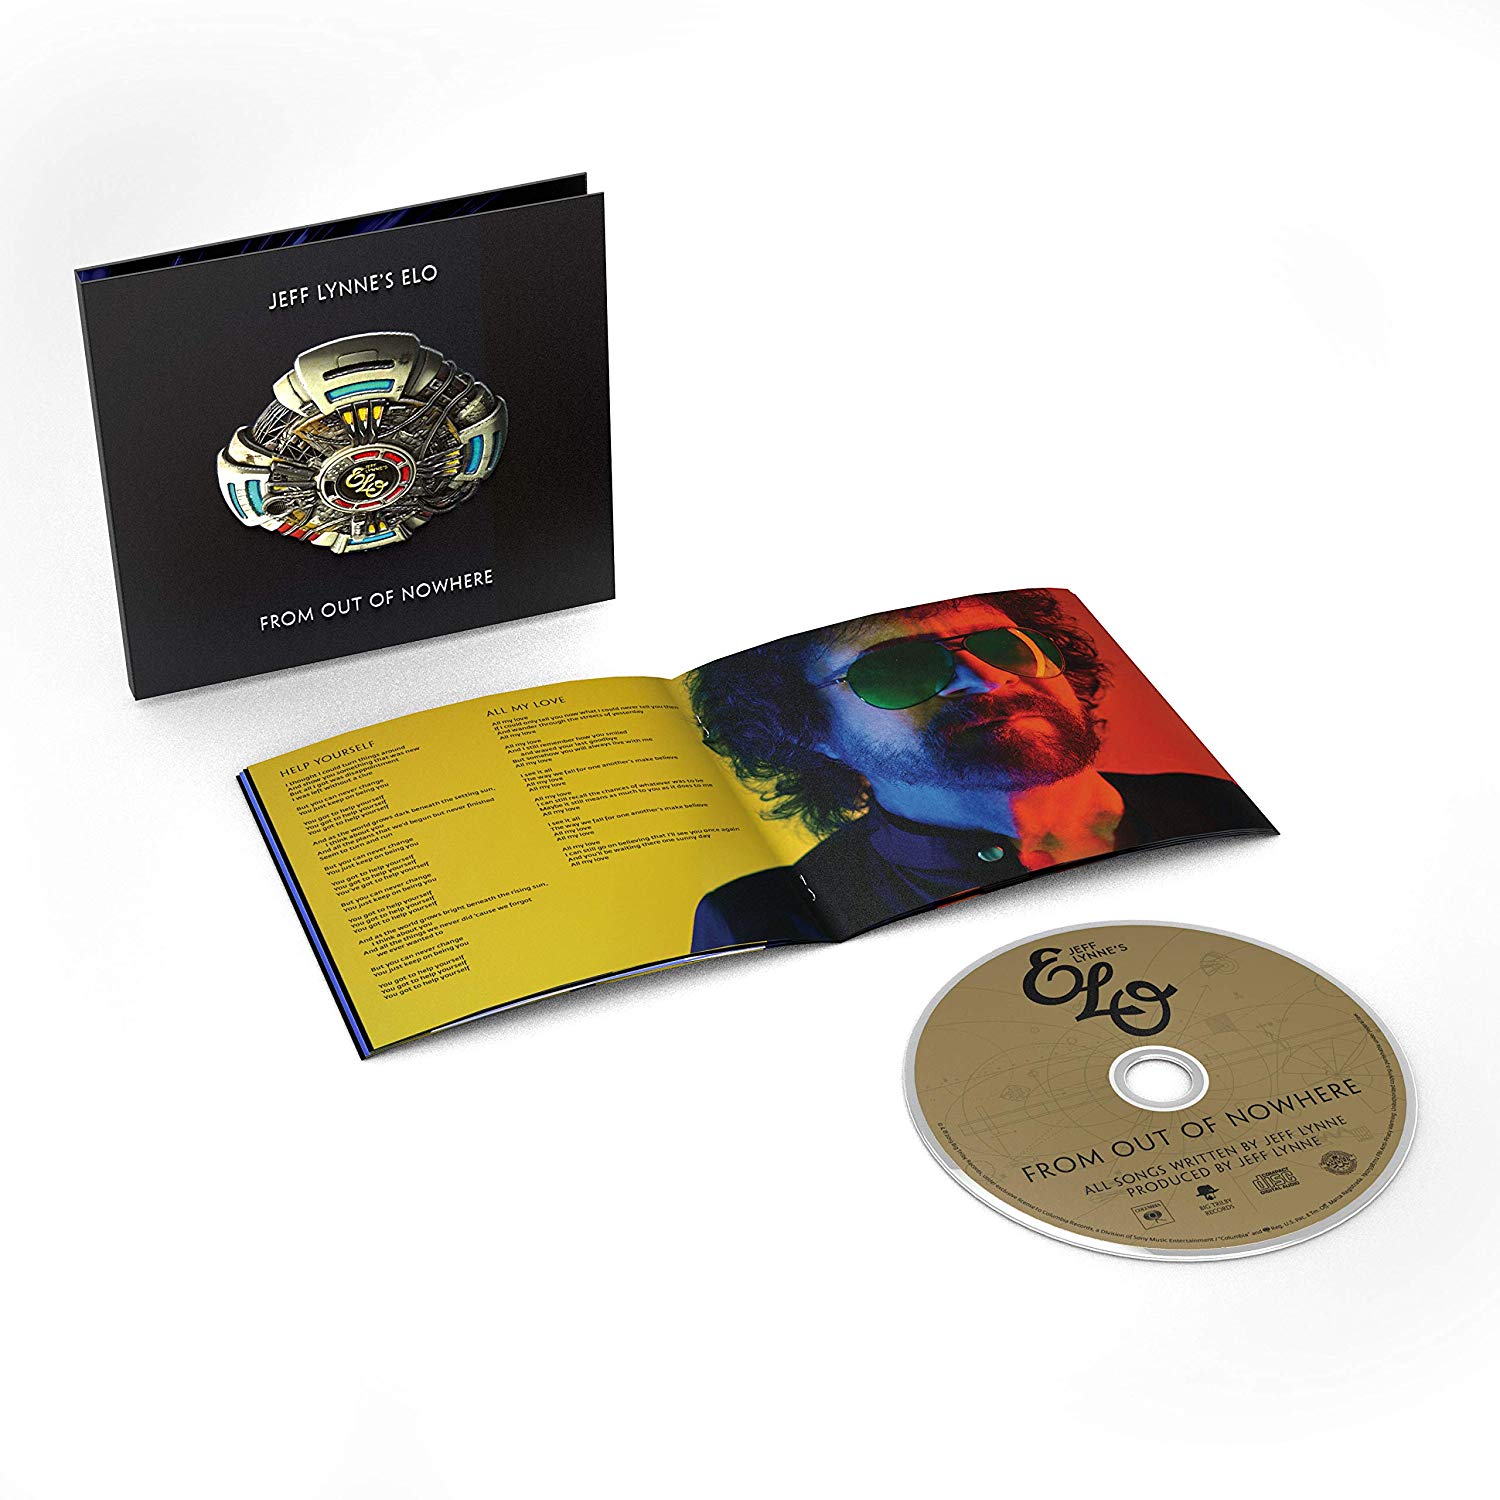 JEFF LYNNE'S ELO / ジェフ・リンズELO / FROM OUT OF NOWHERE (DELUXE CD)